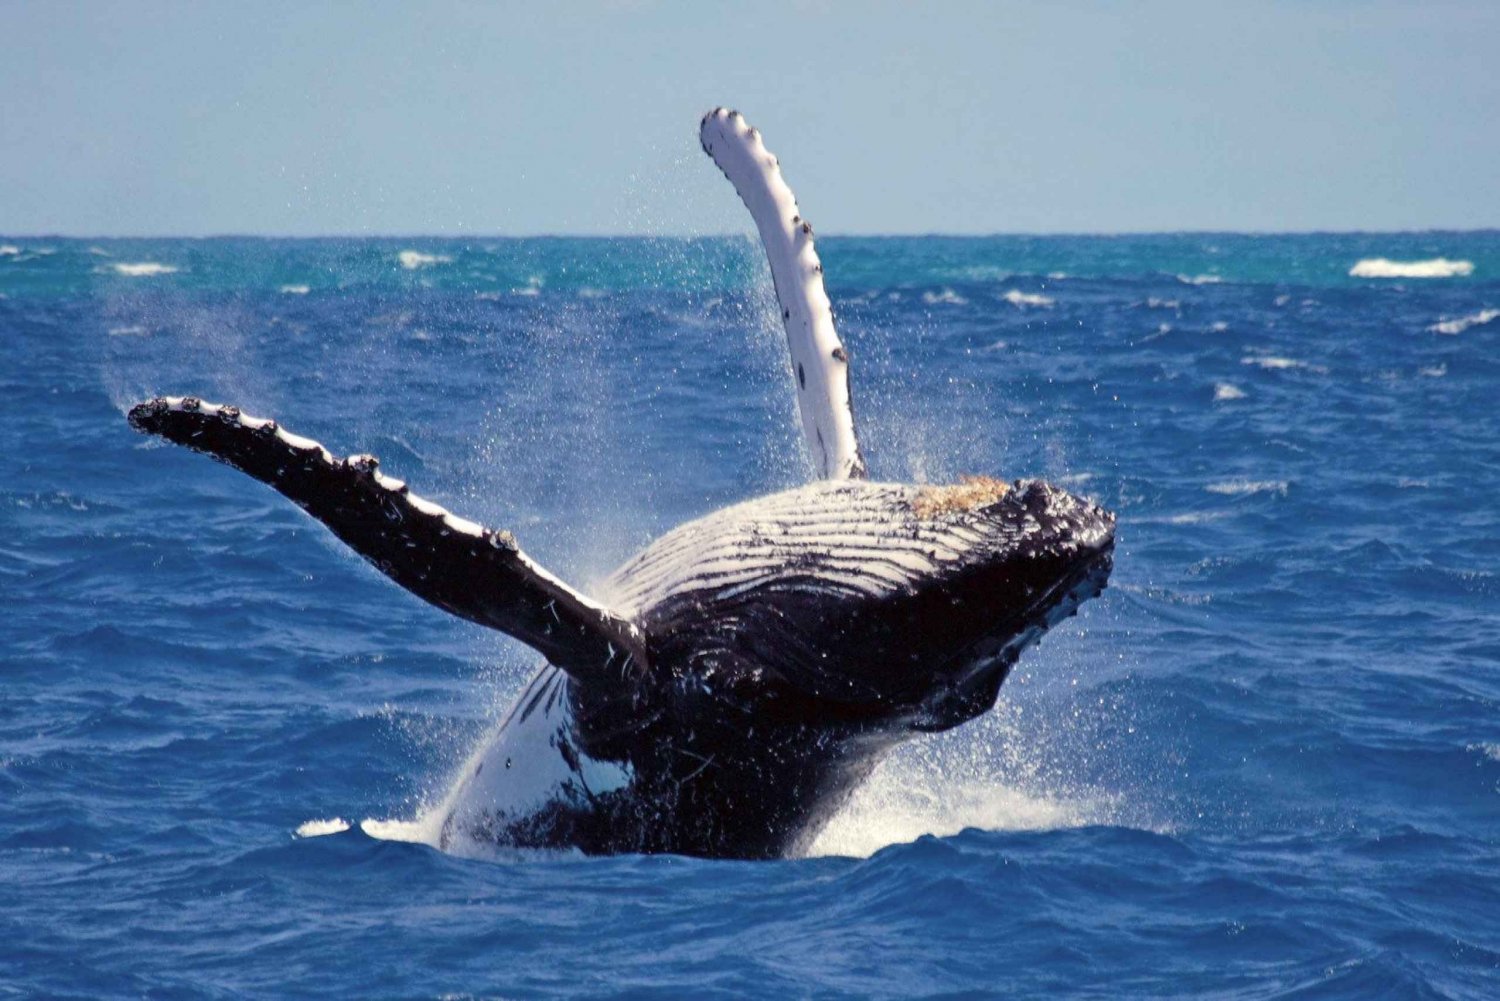 Whale Watching: Full Day Tour from Punta Cana by Airplane